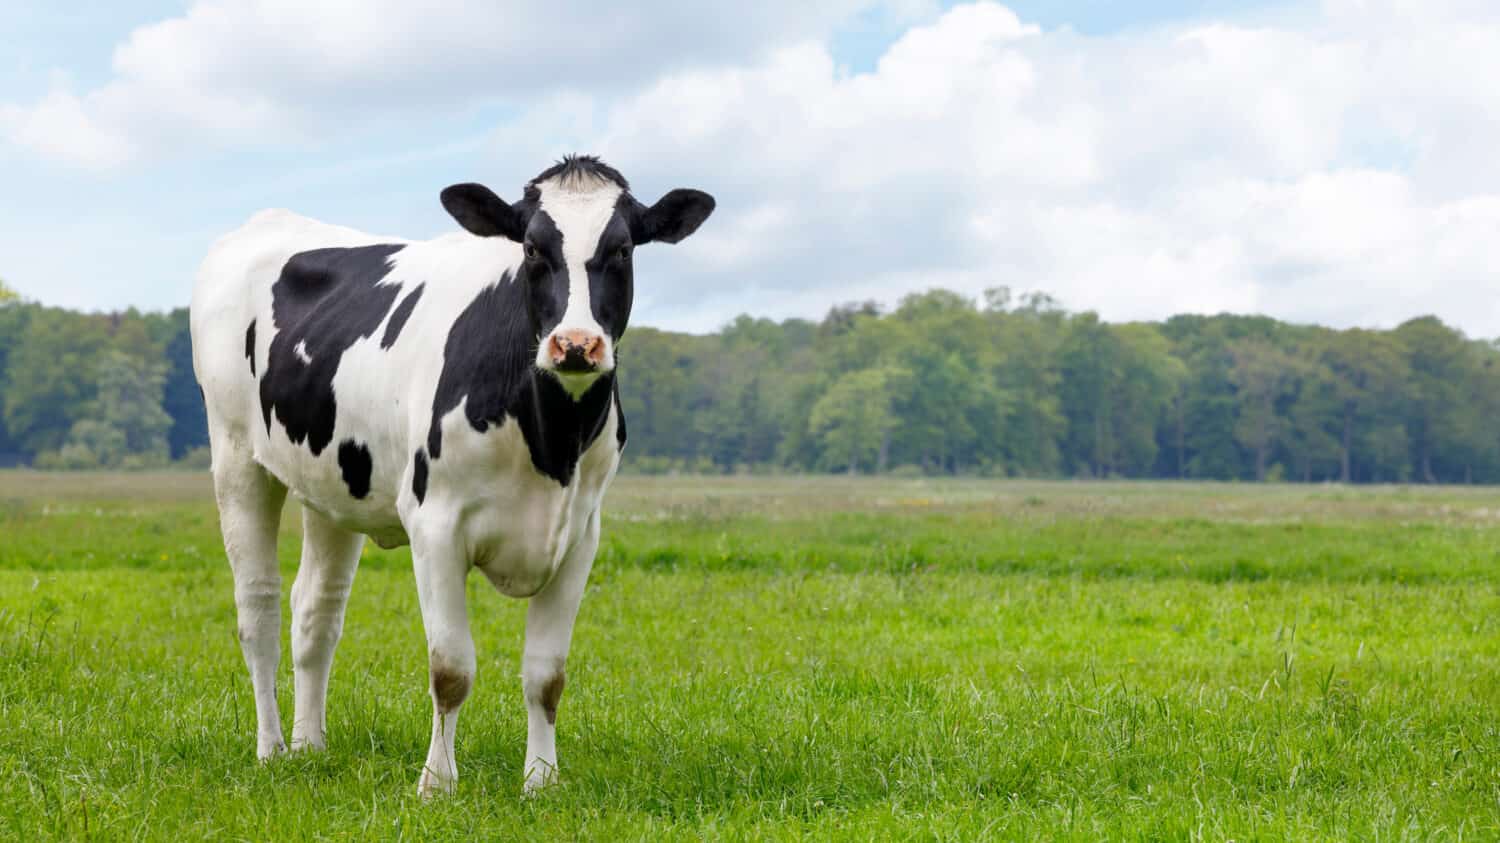 heifer young cow in a field looking, copy space